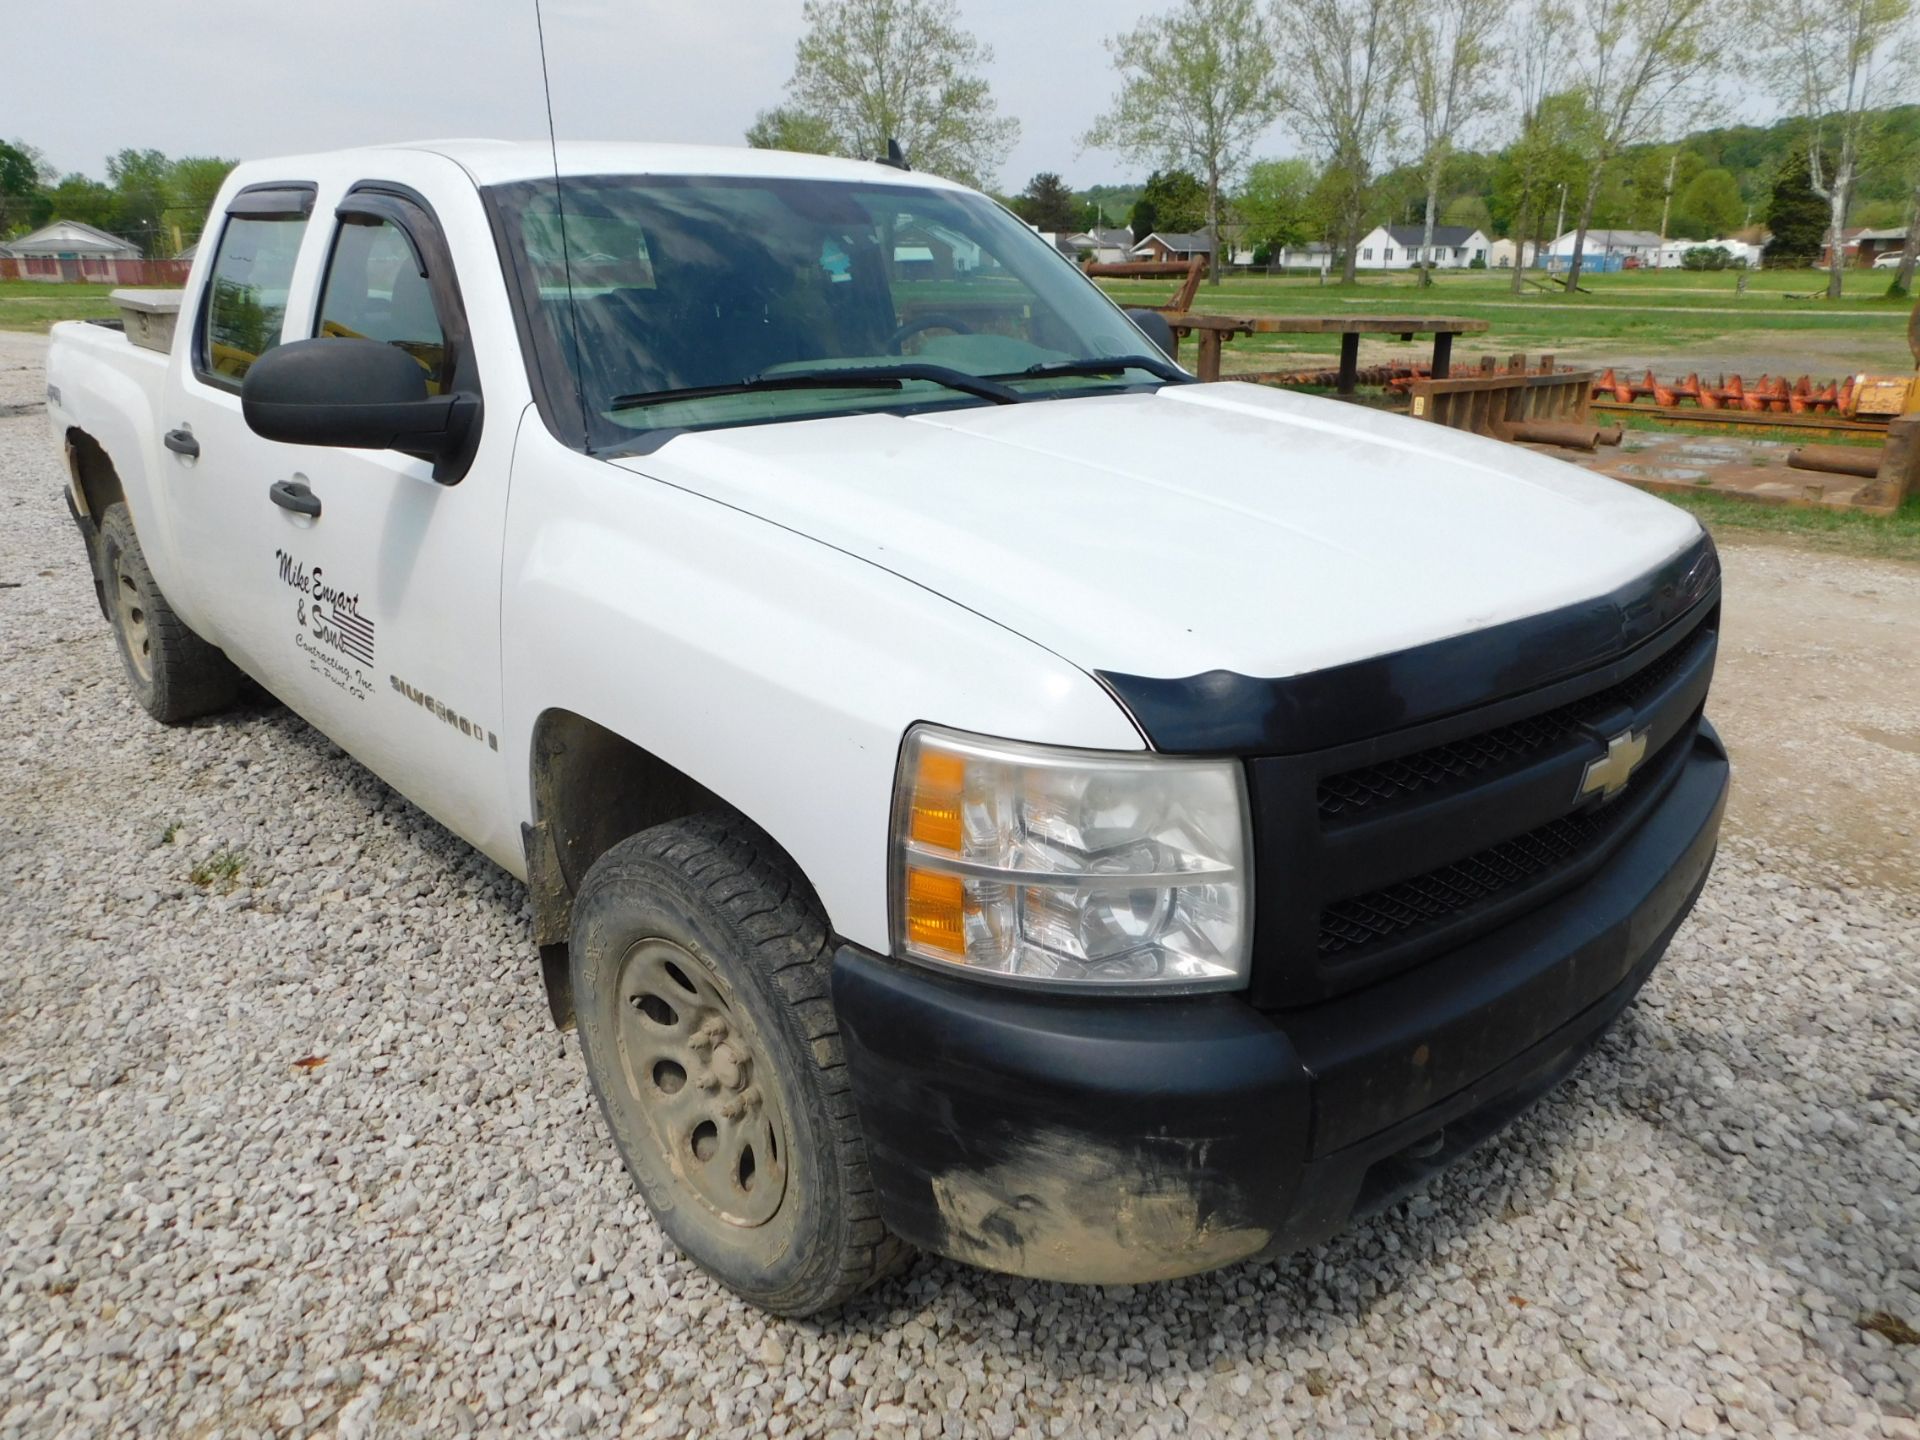 2007 Chevy Silverado 4 dr. pick-up truck, Auto Trans. , Air, am/fm, 4 Wheel Drive, 297,470 miles - Image 3 of 31